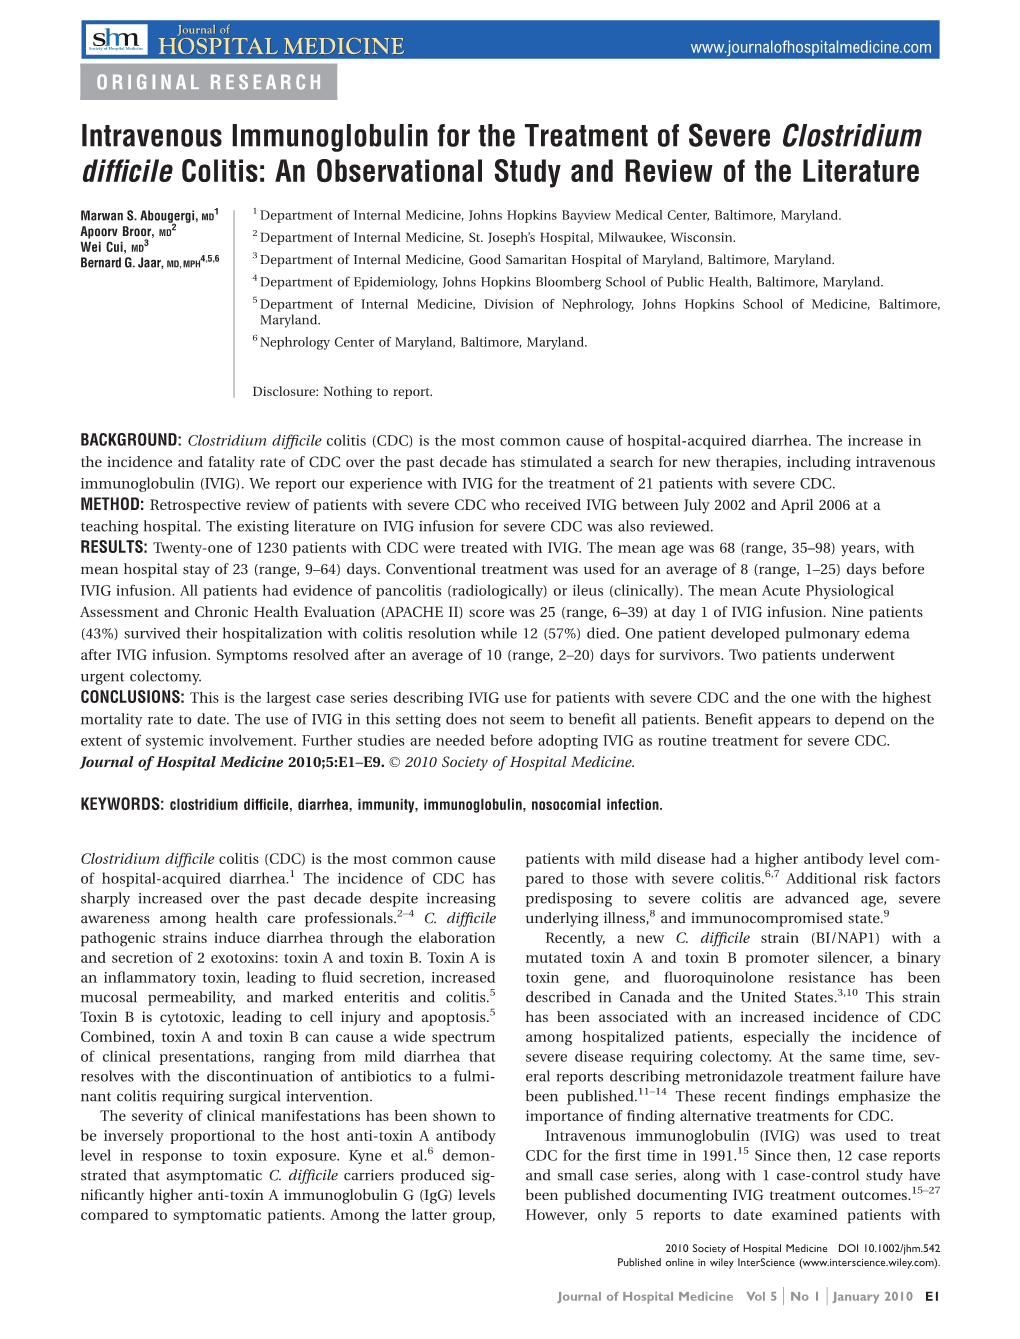 Intravenous Immunoglobulin for the Treatment of Severe Clostridium Difﬁcile Colitis: an Observational Study and Review of the Literature